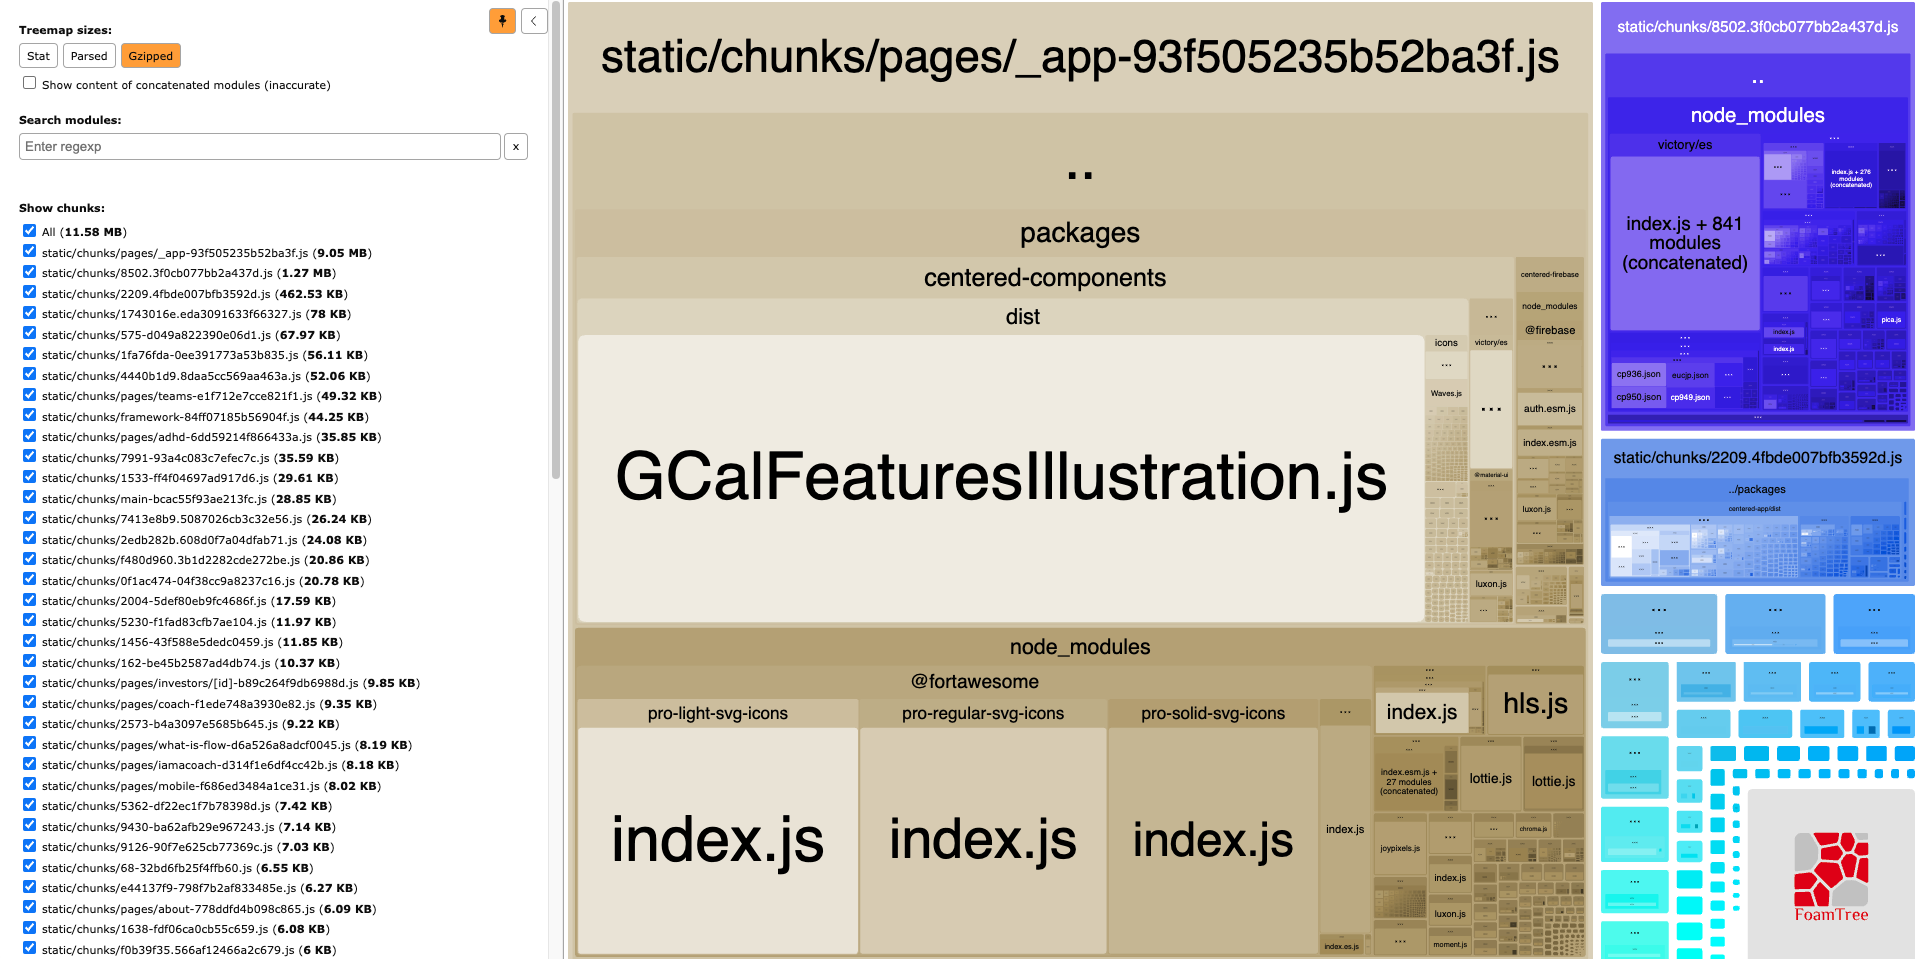 Webpack Bundle Analyzer gzipped output FoamTree visualization. Total chunk size is 11.58 MB, and the biggest chunk is pages/_app at 9.05 MB. A very large GCalFeaturesIllustration.js is inside the app bundle